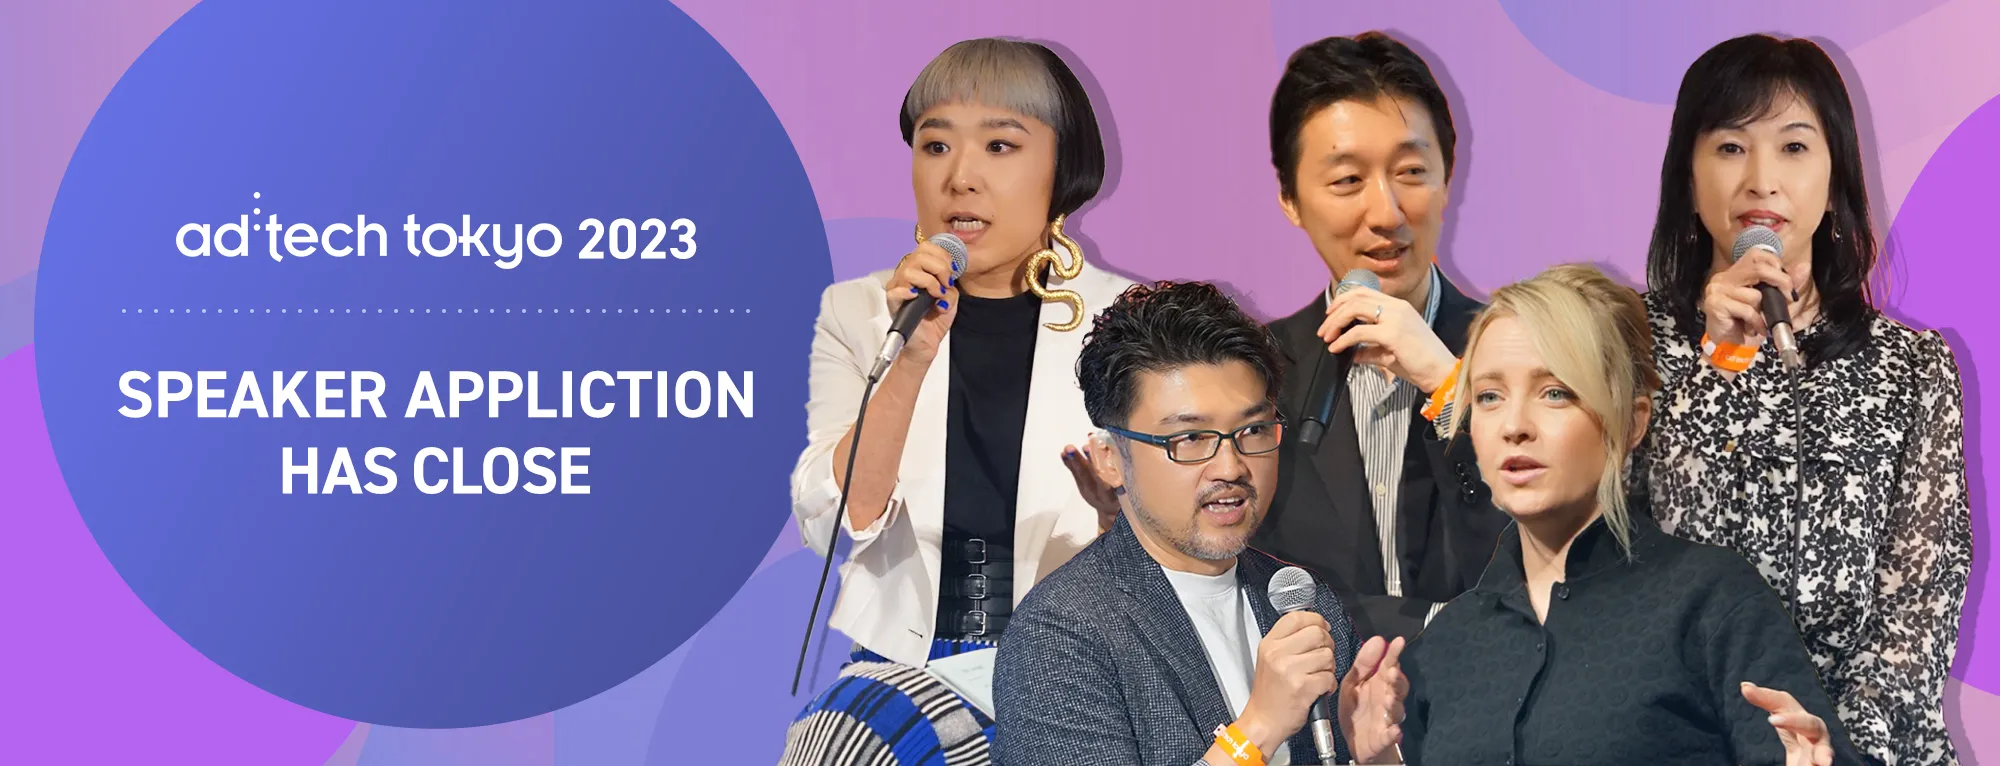 What are Official ad:tech tokyo Speakers?